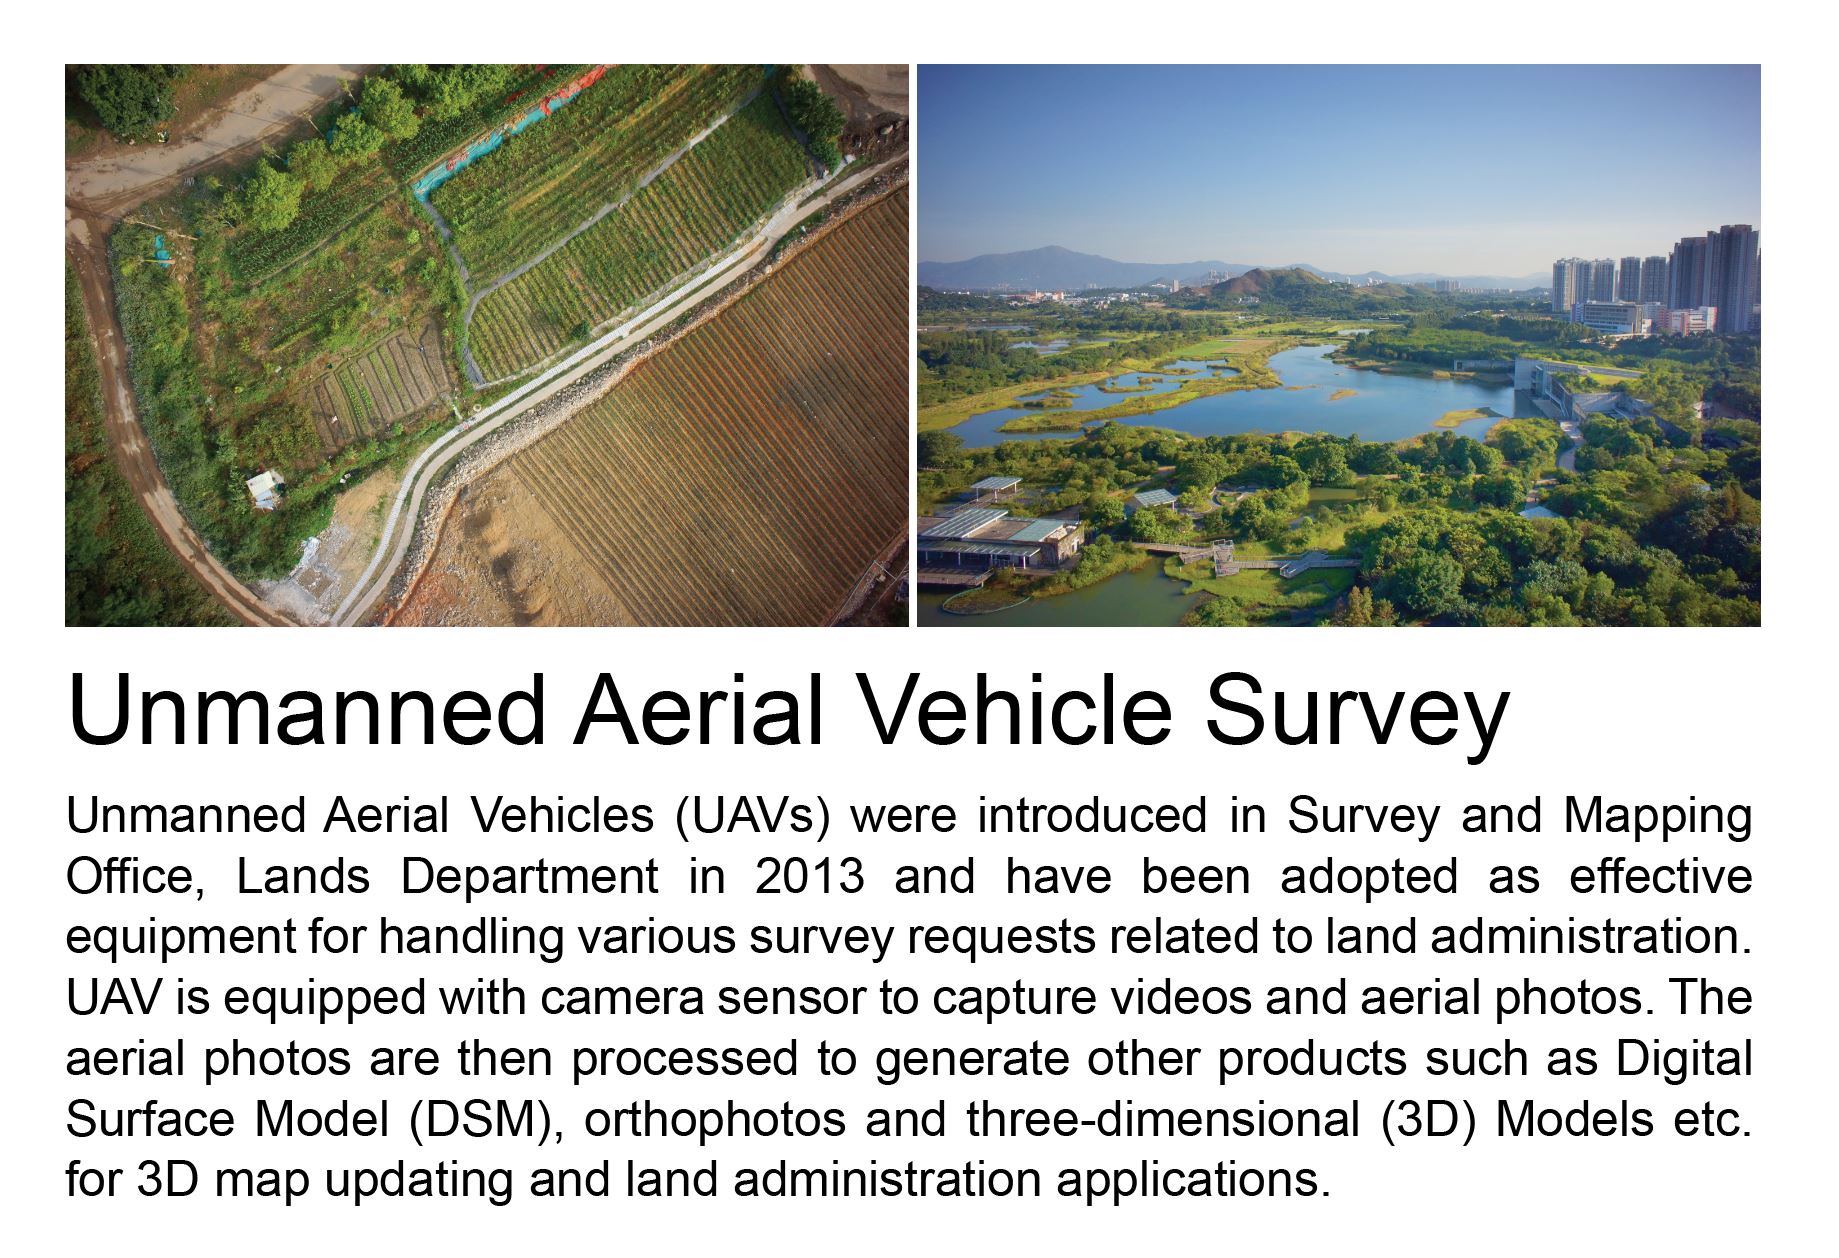 Unmanned Aerial Vehicle Survey,
				Unmanned Aerial Vehicles (UAVs) were introduced in Survey and Mapping Office, Lands Department in 2013 and have been adopted as effective equipment for handling various survey requests related to land administration.  UAV is equipped with camera sensor to capture videos and aerial photos.  The aerial photos are then processed to generate other products such as Digital Surface Model (DSM), orthophotos and three-dimensional (3D) Models etc. for 3D map updating and land administration applications.